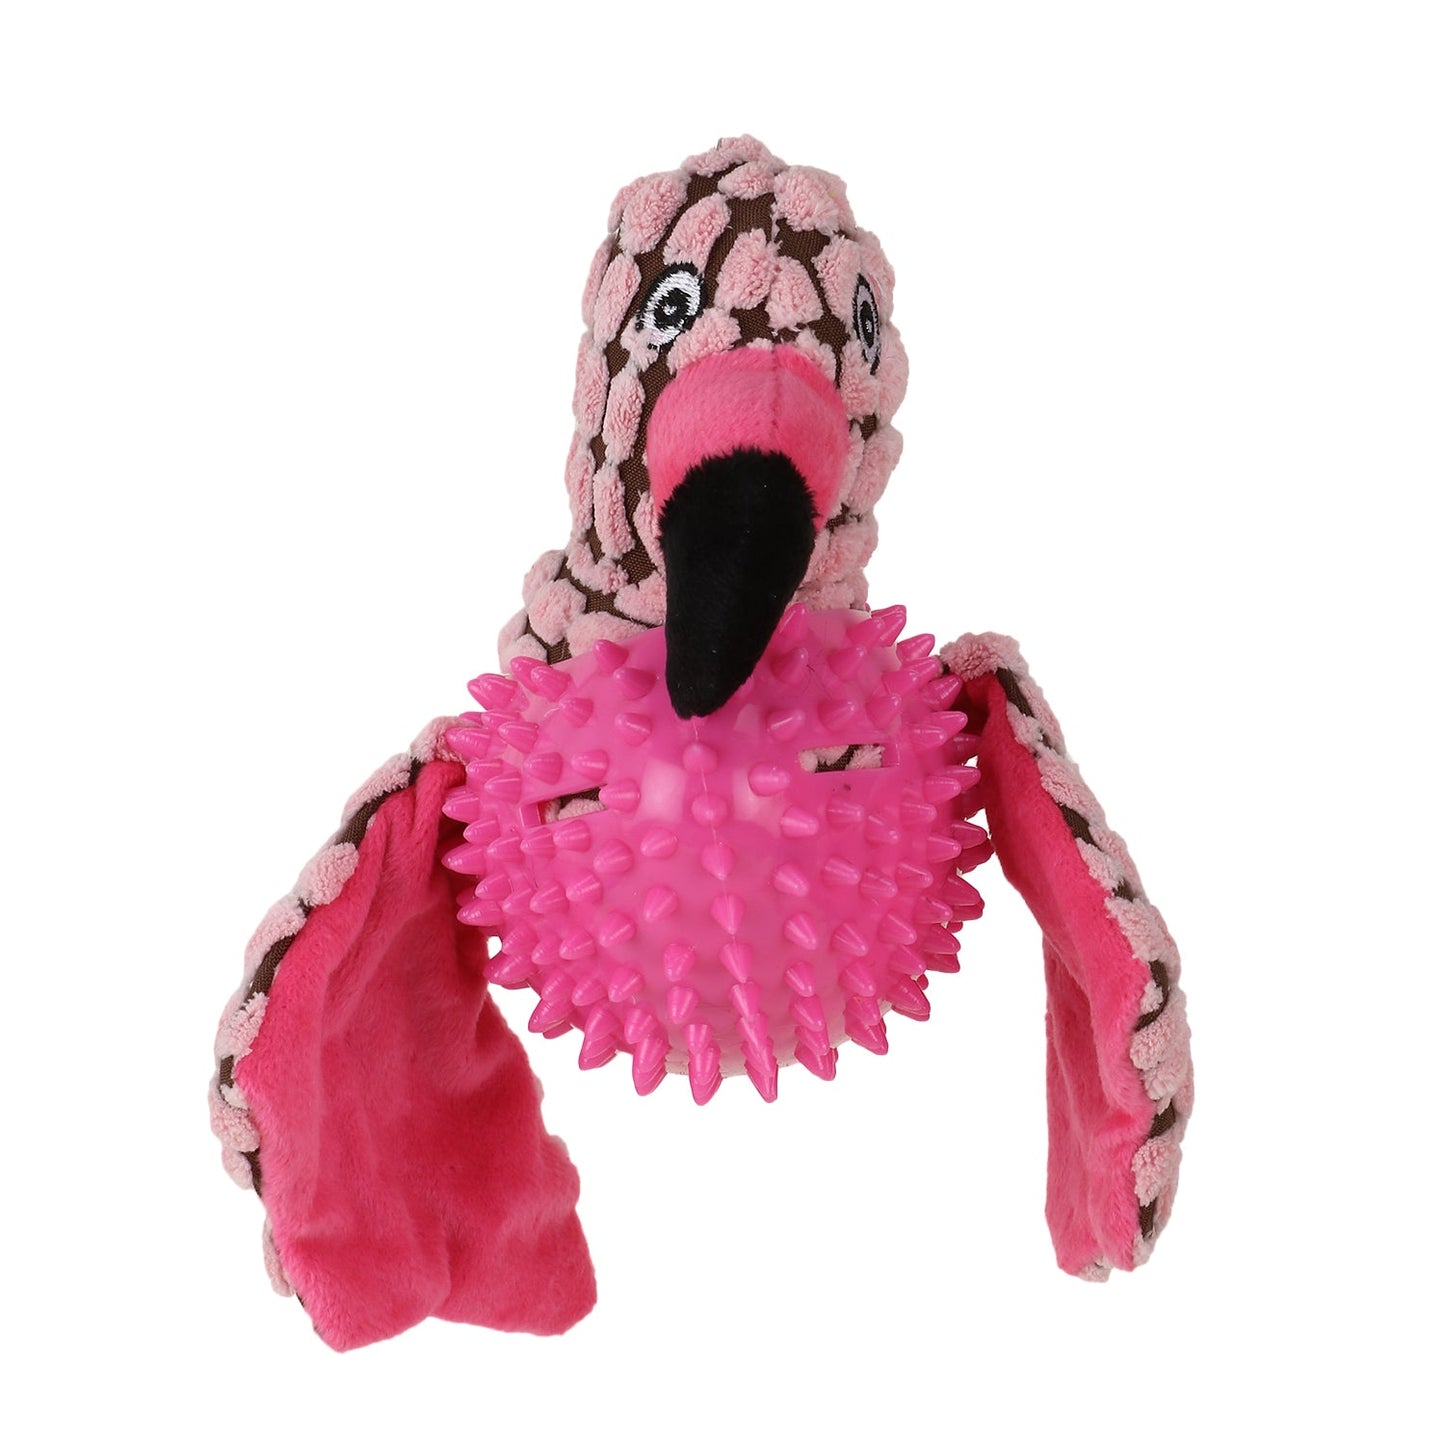 Basil Bird Plush Pet Toy for Dogs & Puppies with Squeaky Neck (Pink)